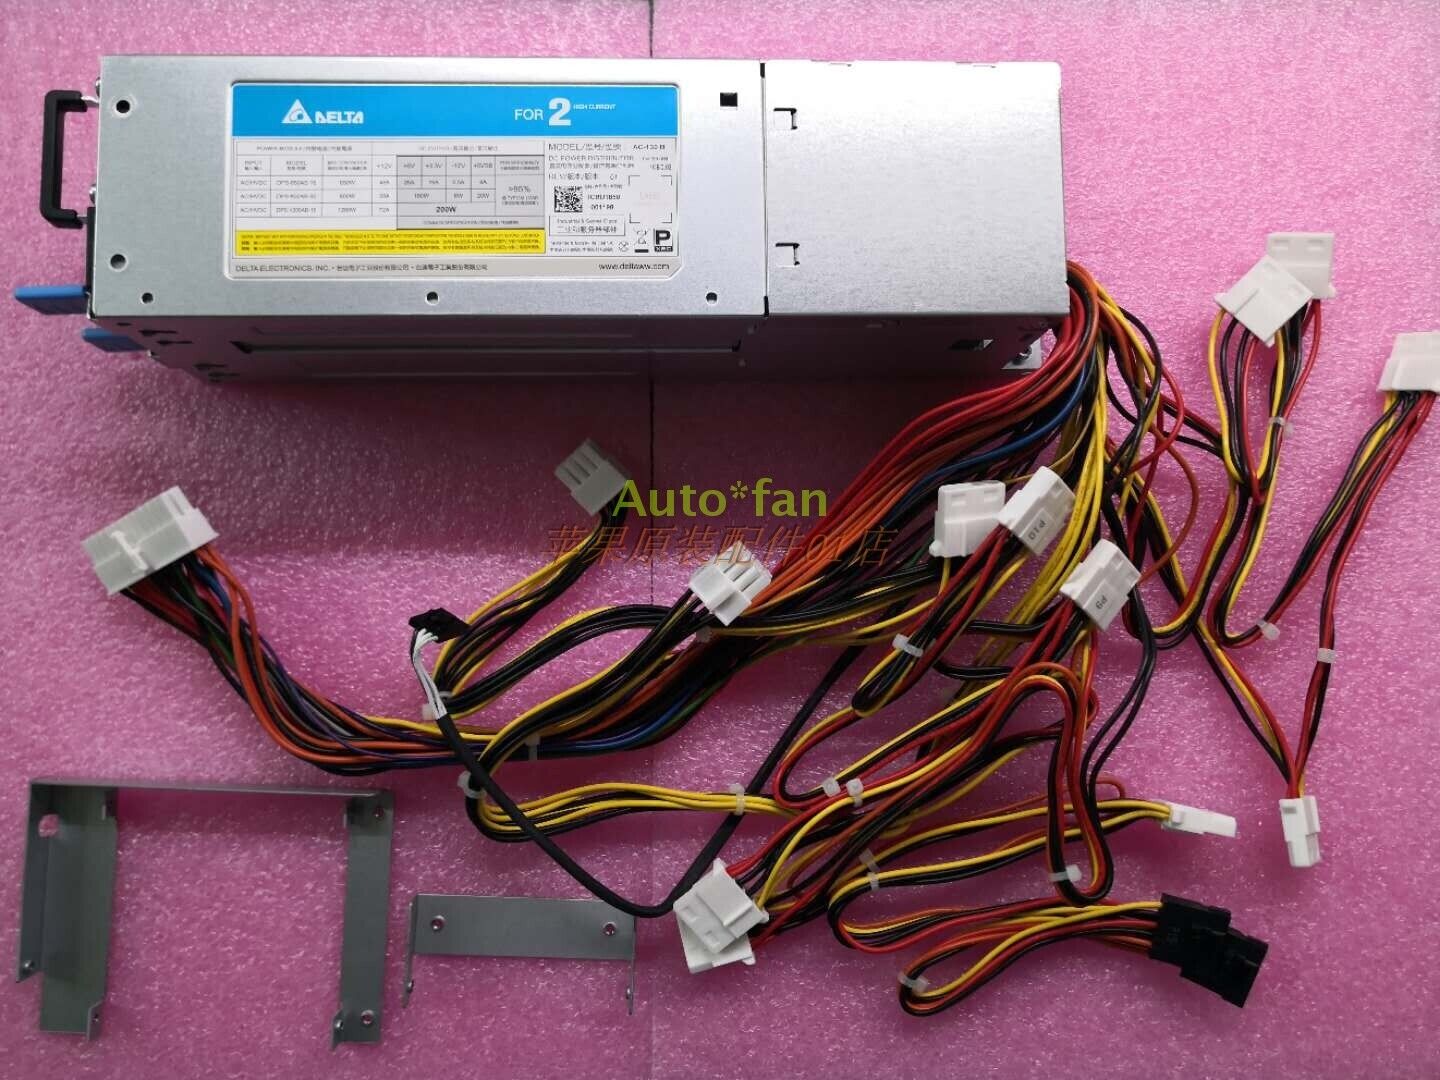 2 PCS New DPS-650AB-16 A 650W 2U CRPS Redundant Power Supply Module With Chassis